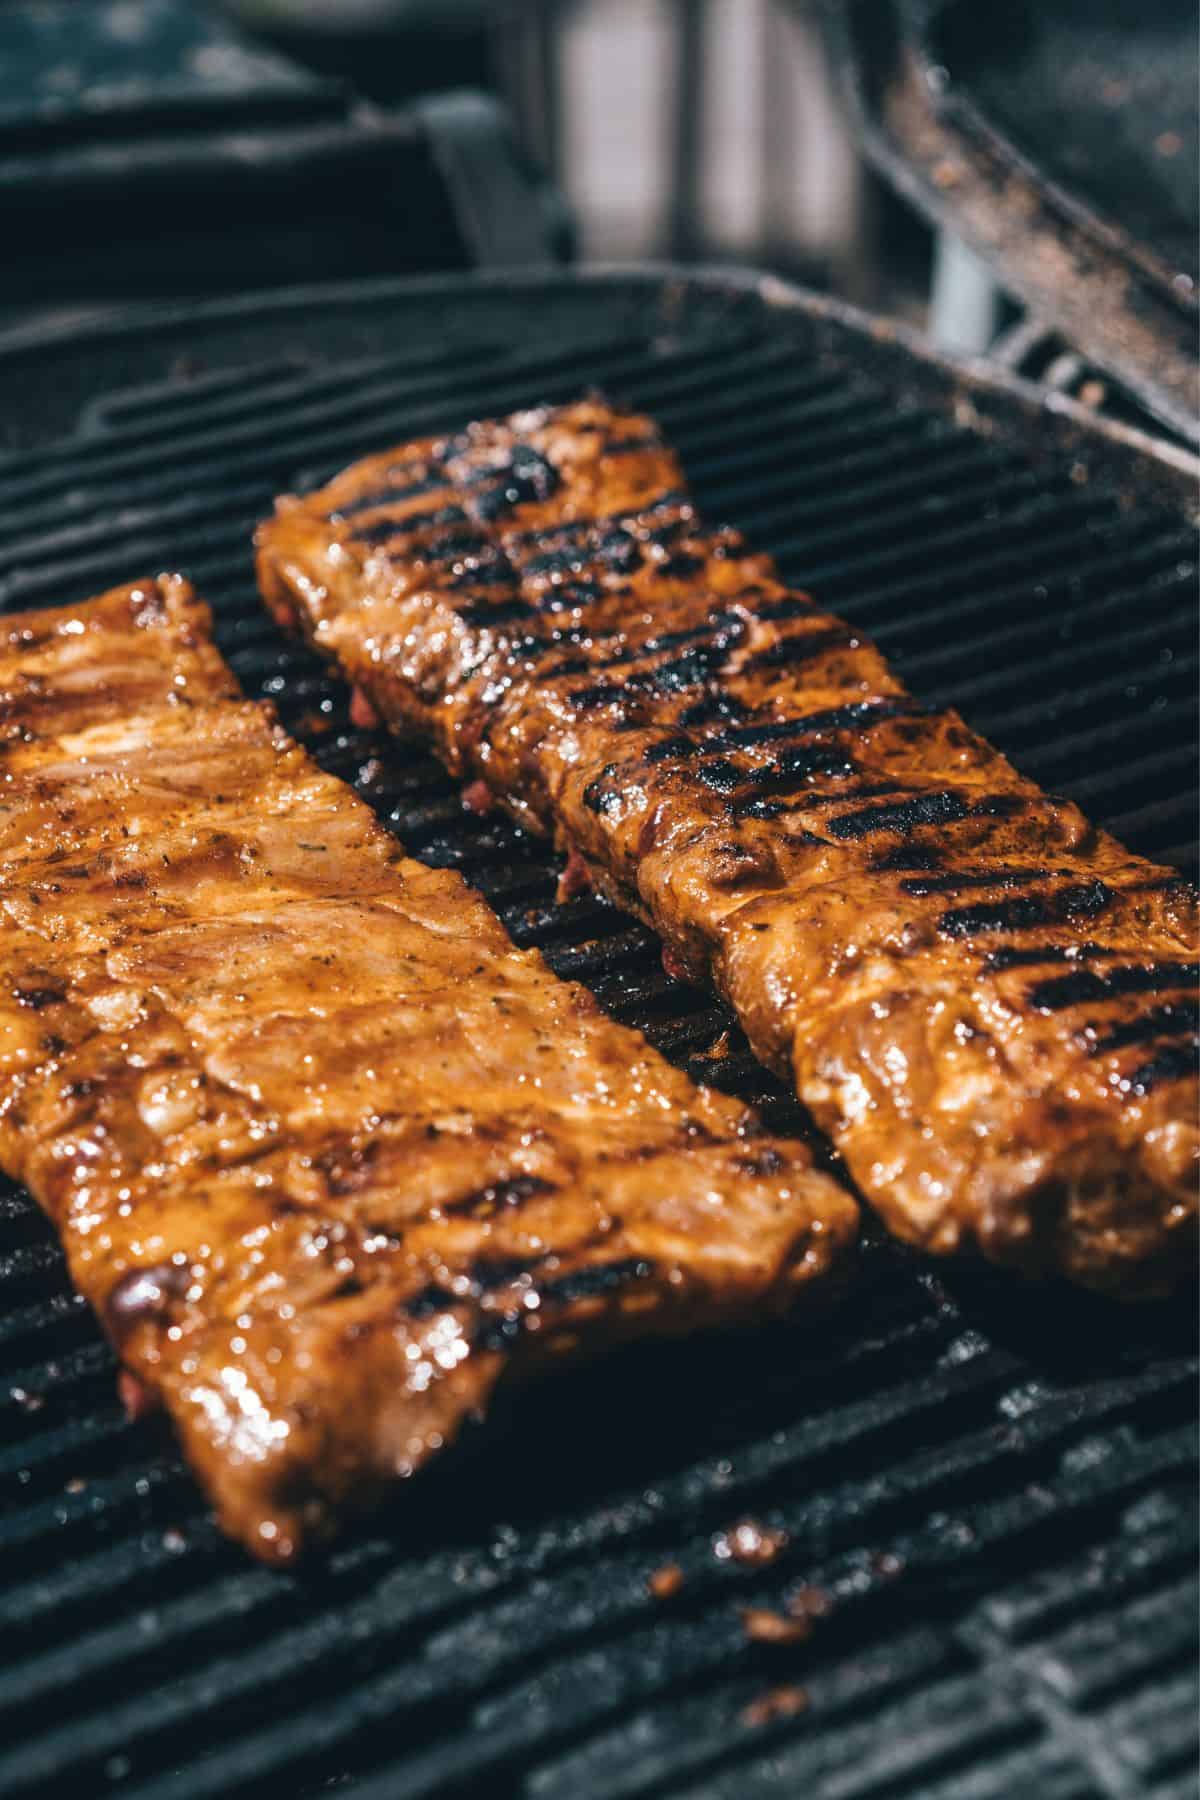 two racks of baby back ribs on a bbq grill.